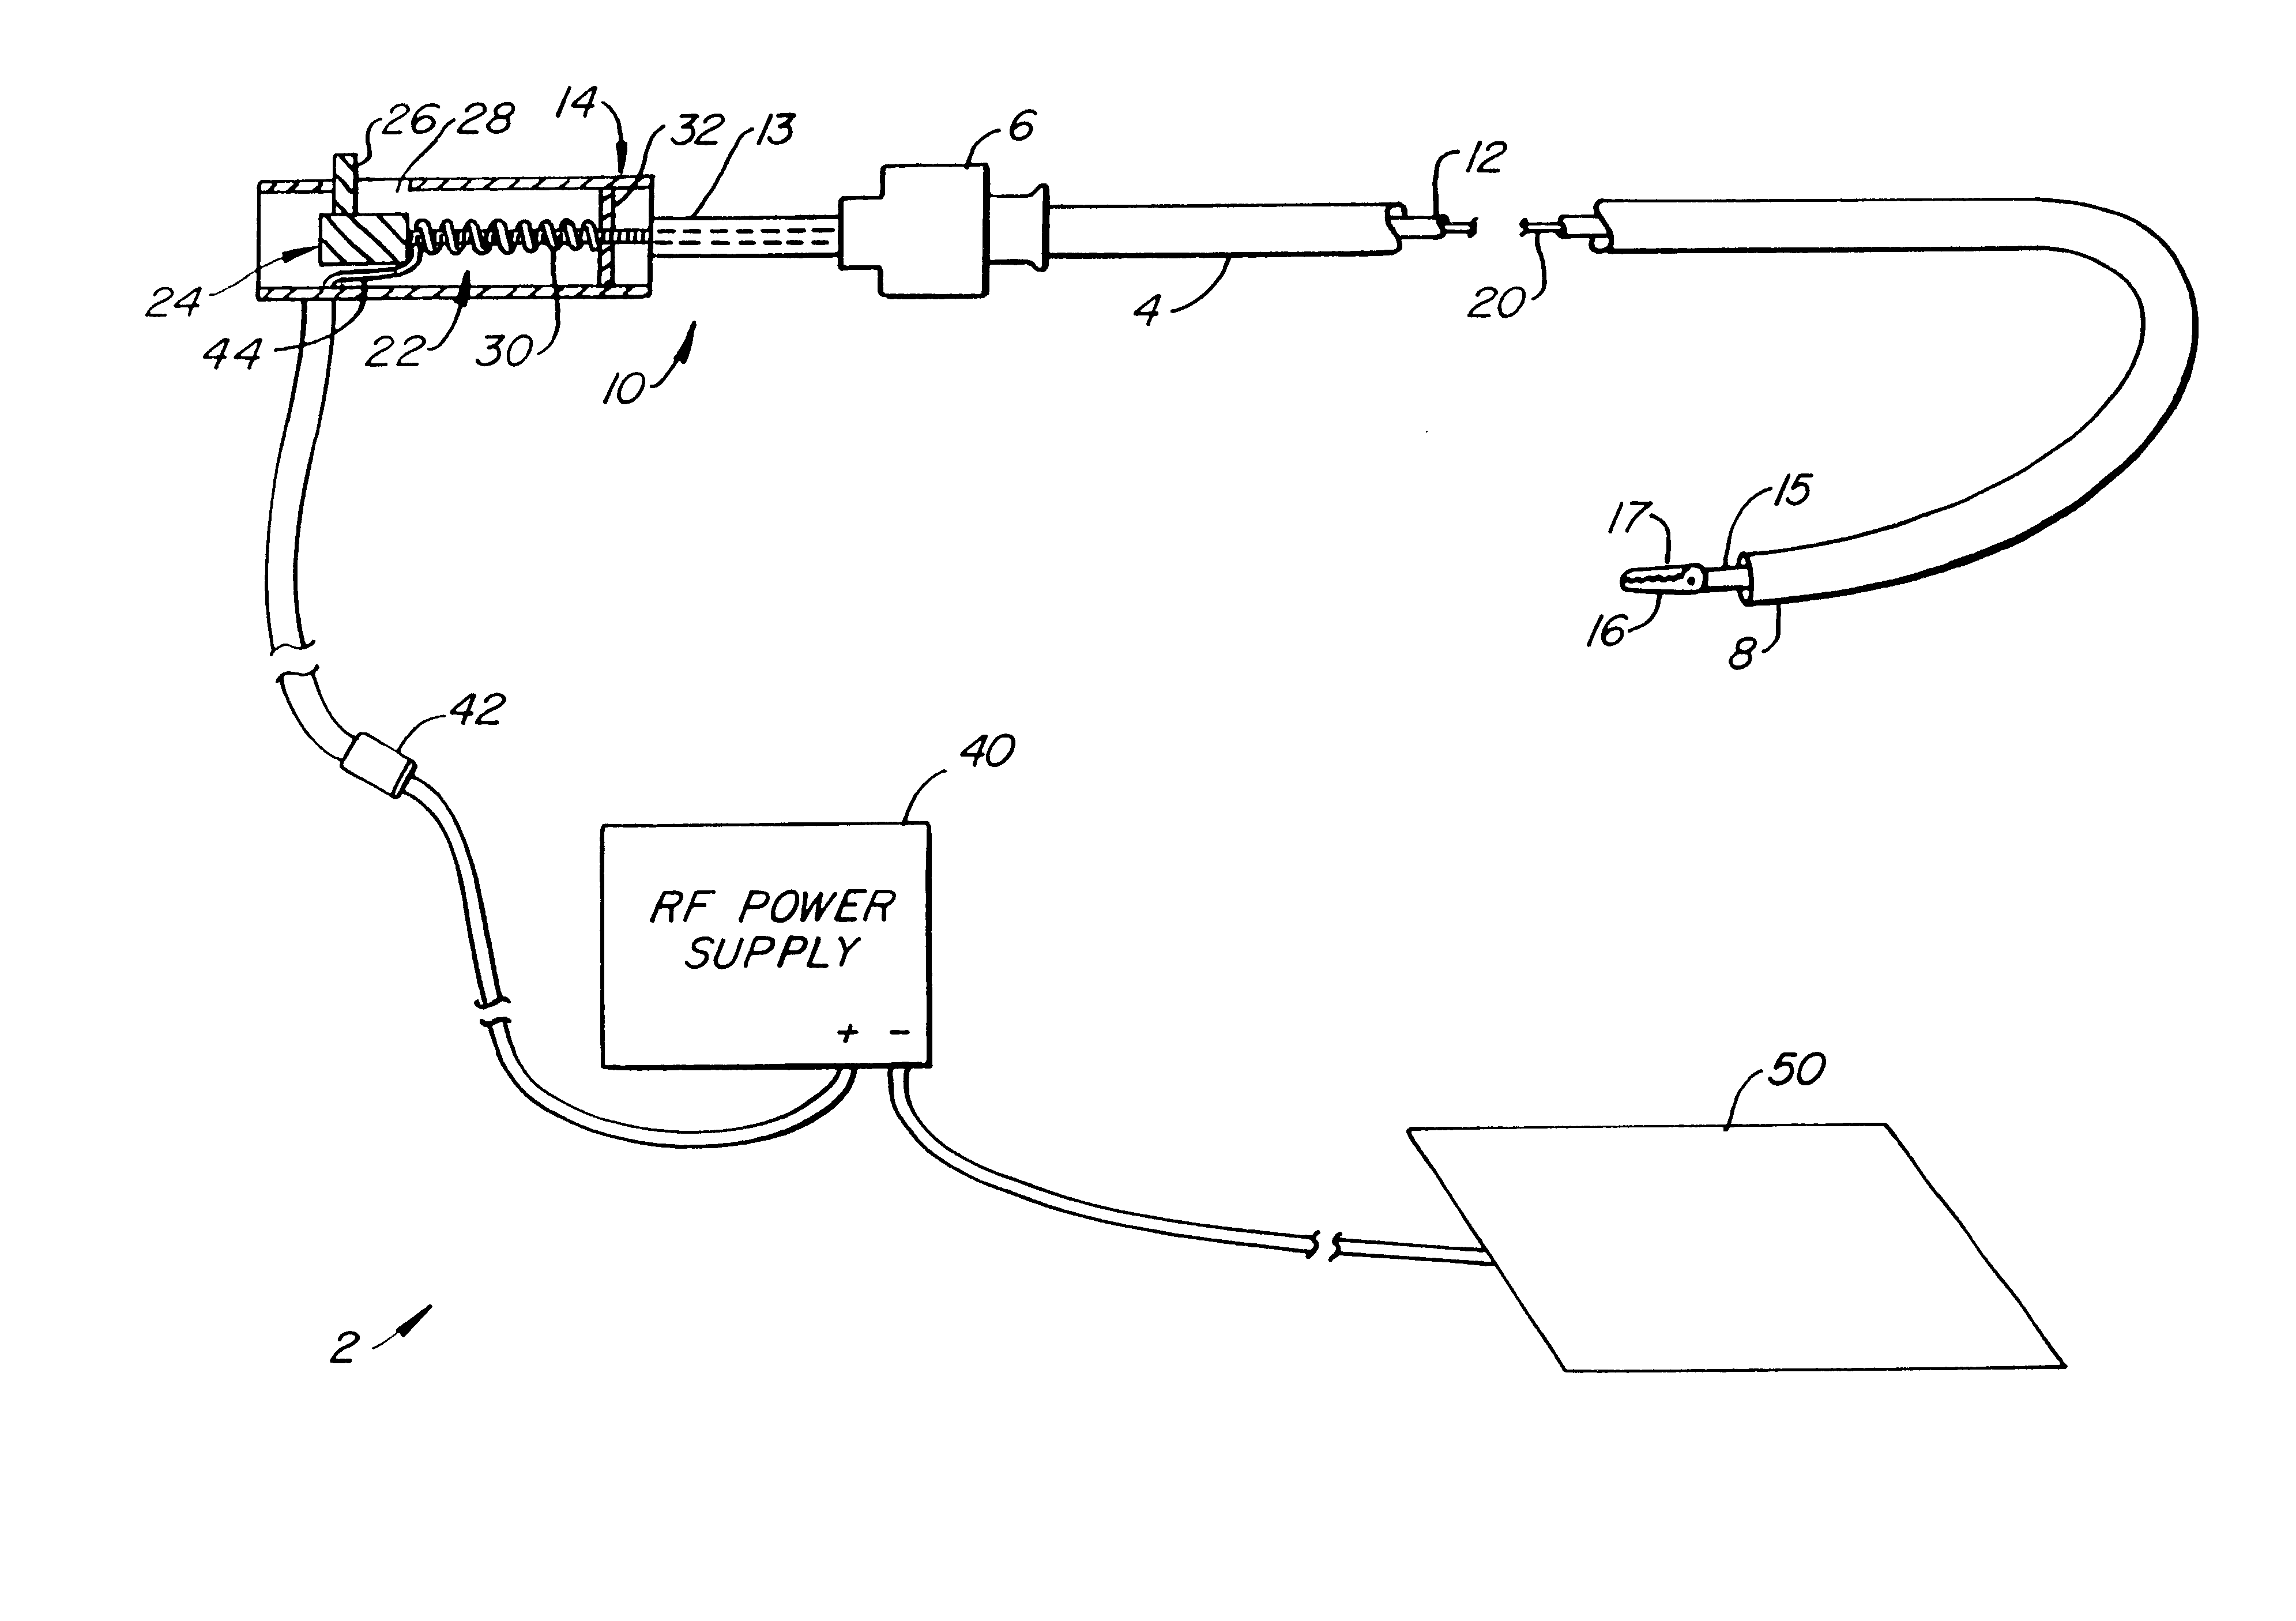 Method and device for enhancing vessel occlusion